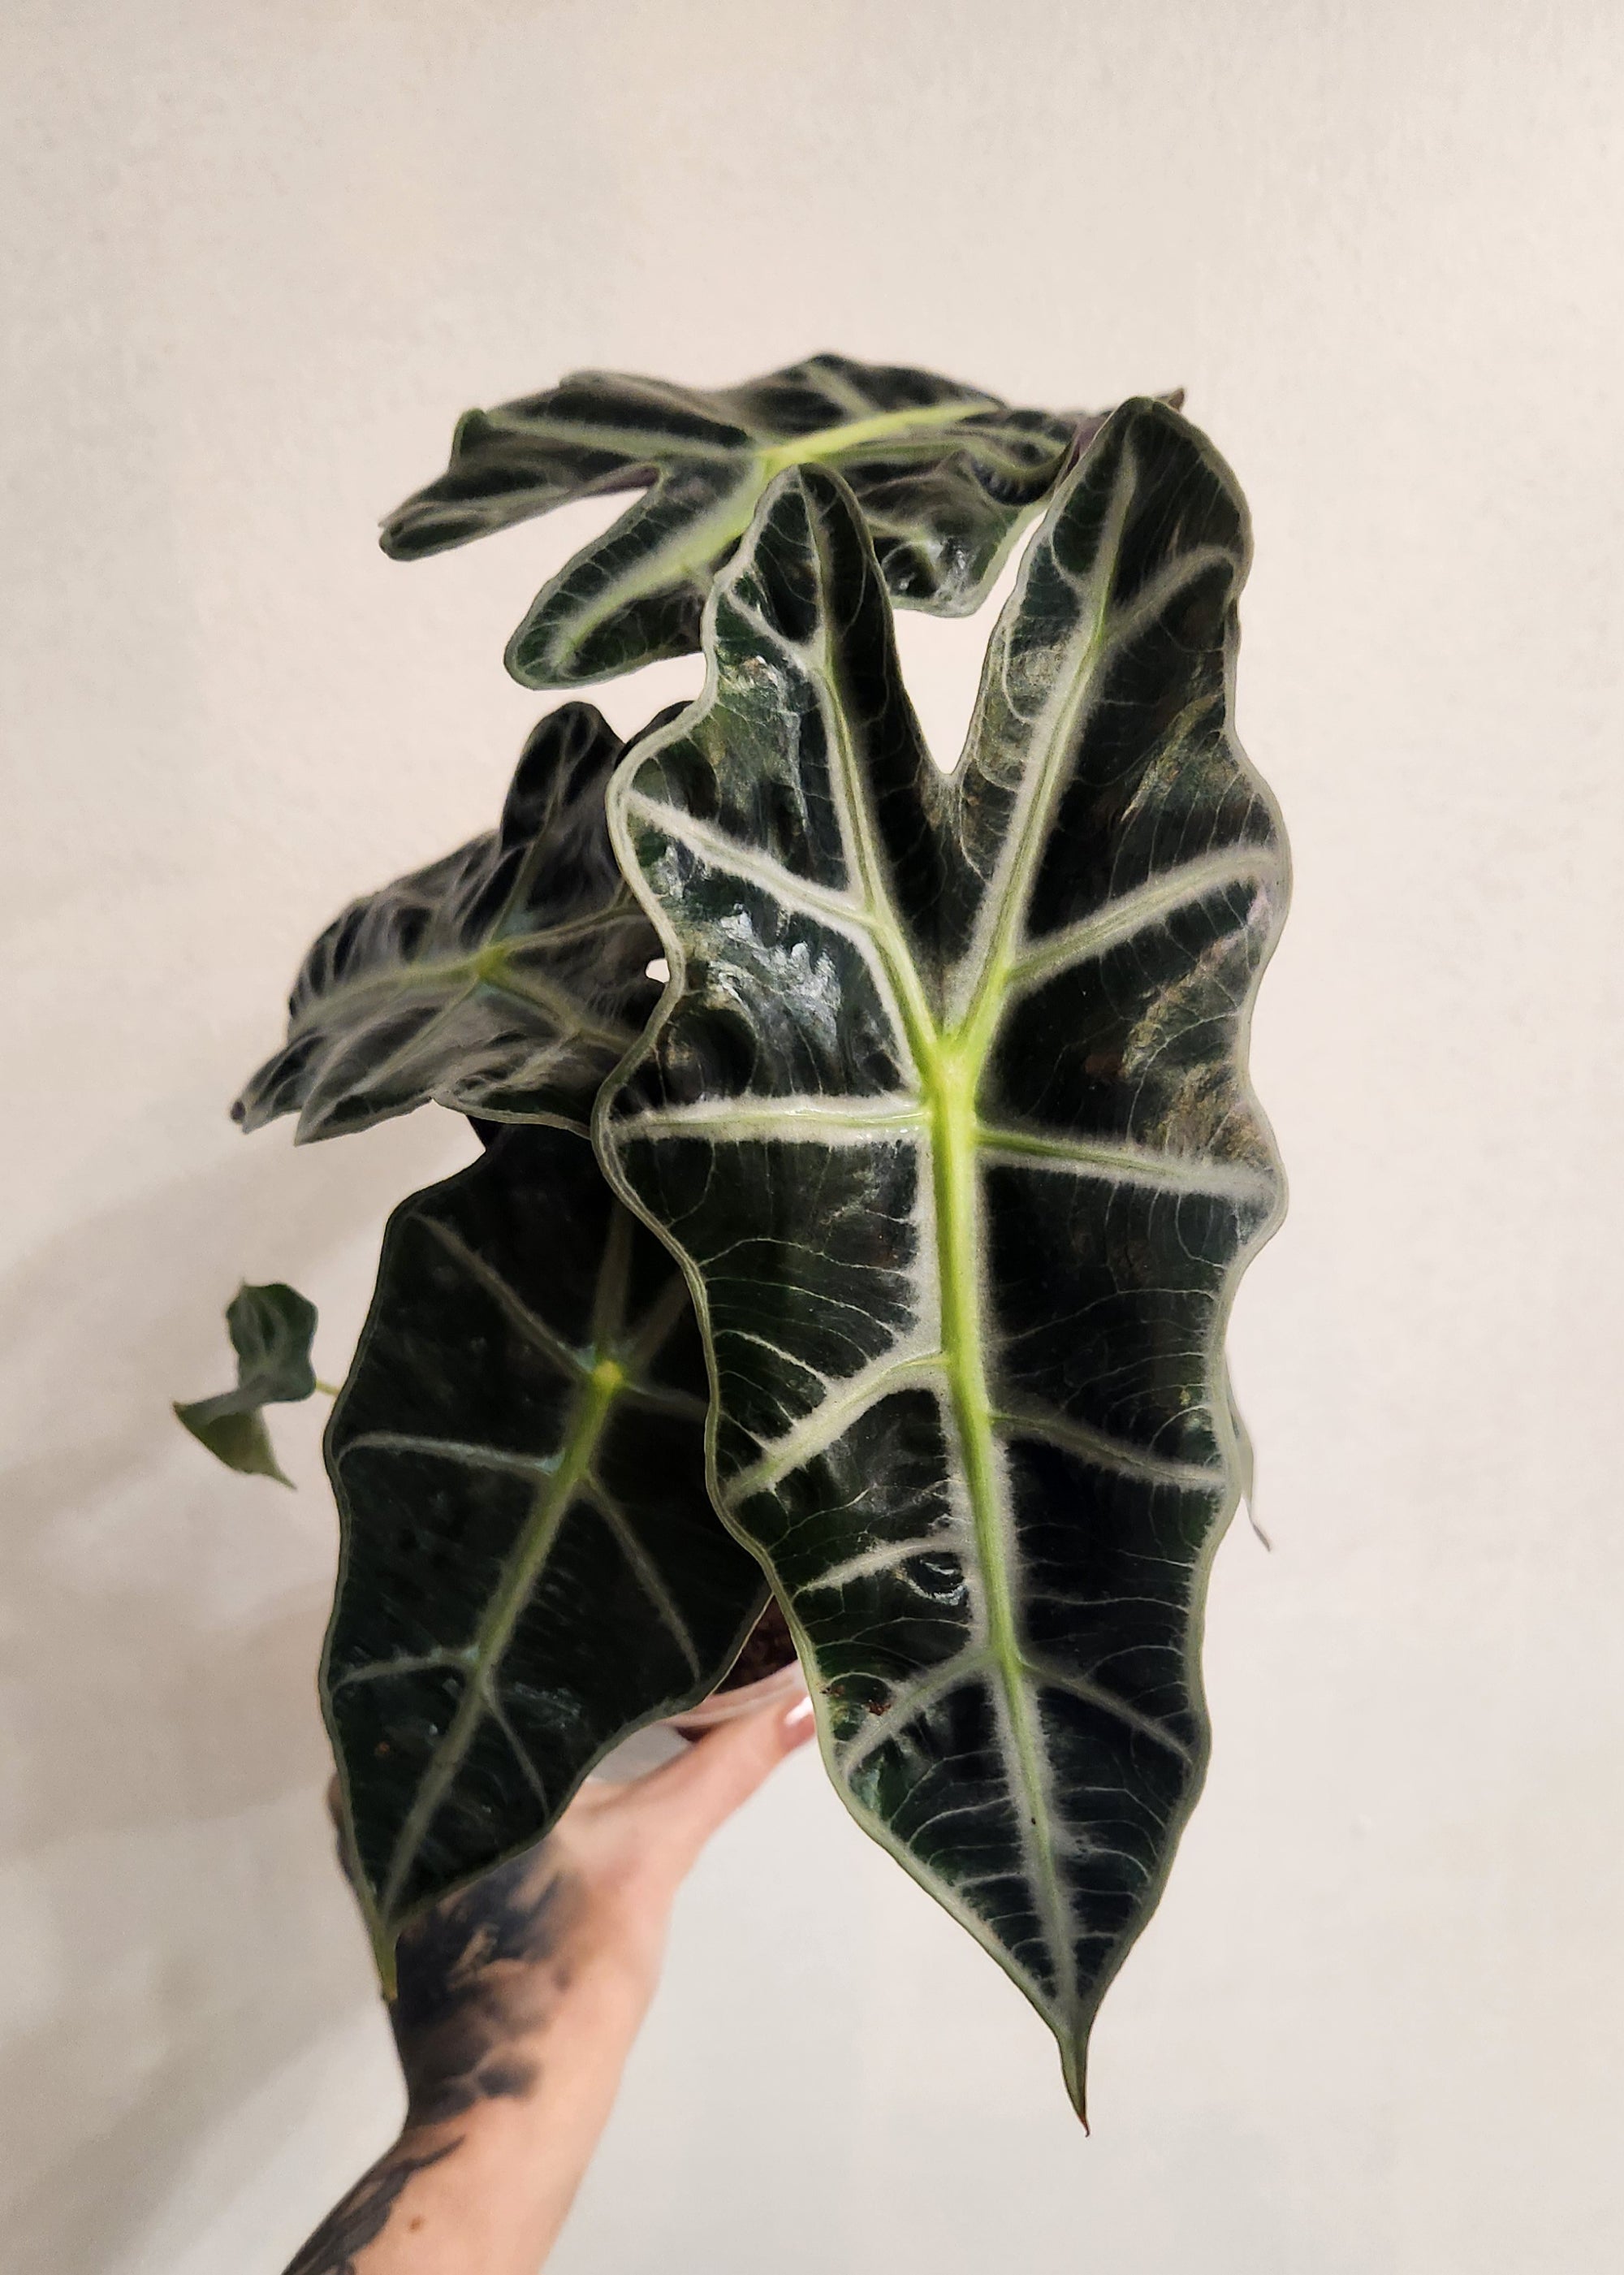 4" Alocasia African Mask Polly